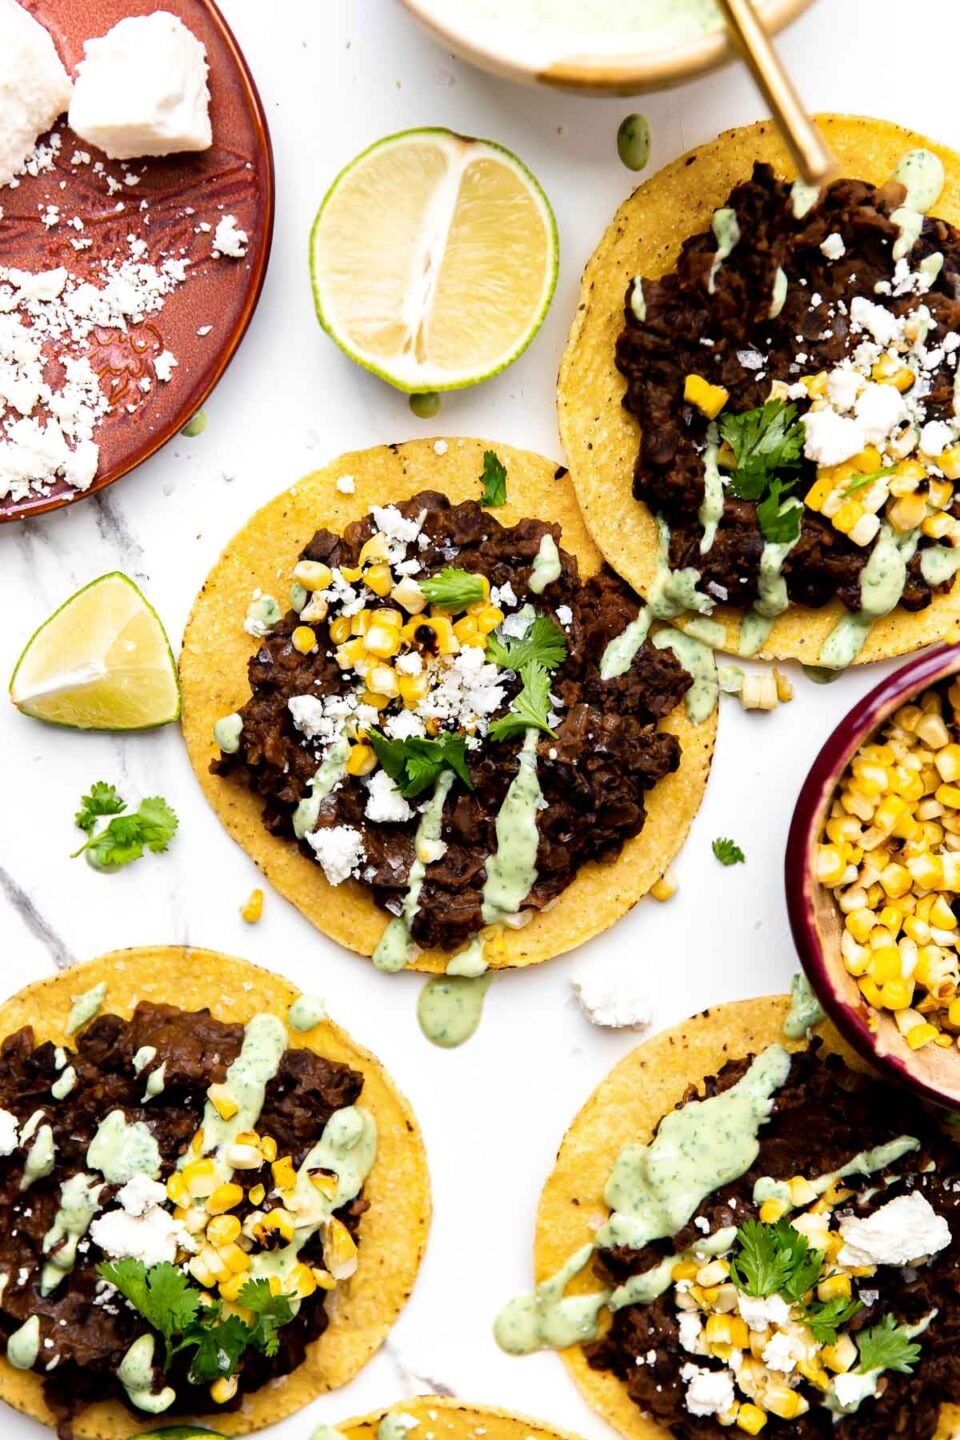 Four assembled black bean tostadas arranged on a gray and white marble surface surrounded by a red ceramic plate topped with cotija cheese, a small ceramic bowl filled with avocado crema with a gold spoon resting inside, a small ceramic bowl filled with kernels of charred sweet corn, and fresh lime wedges surround the bean tostadas.